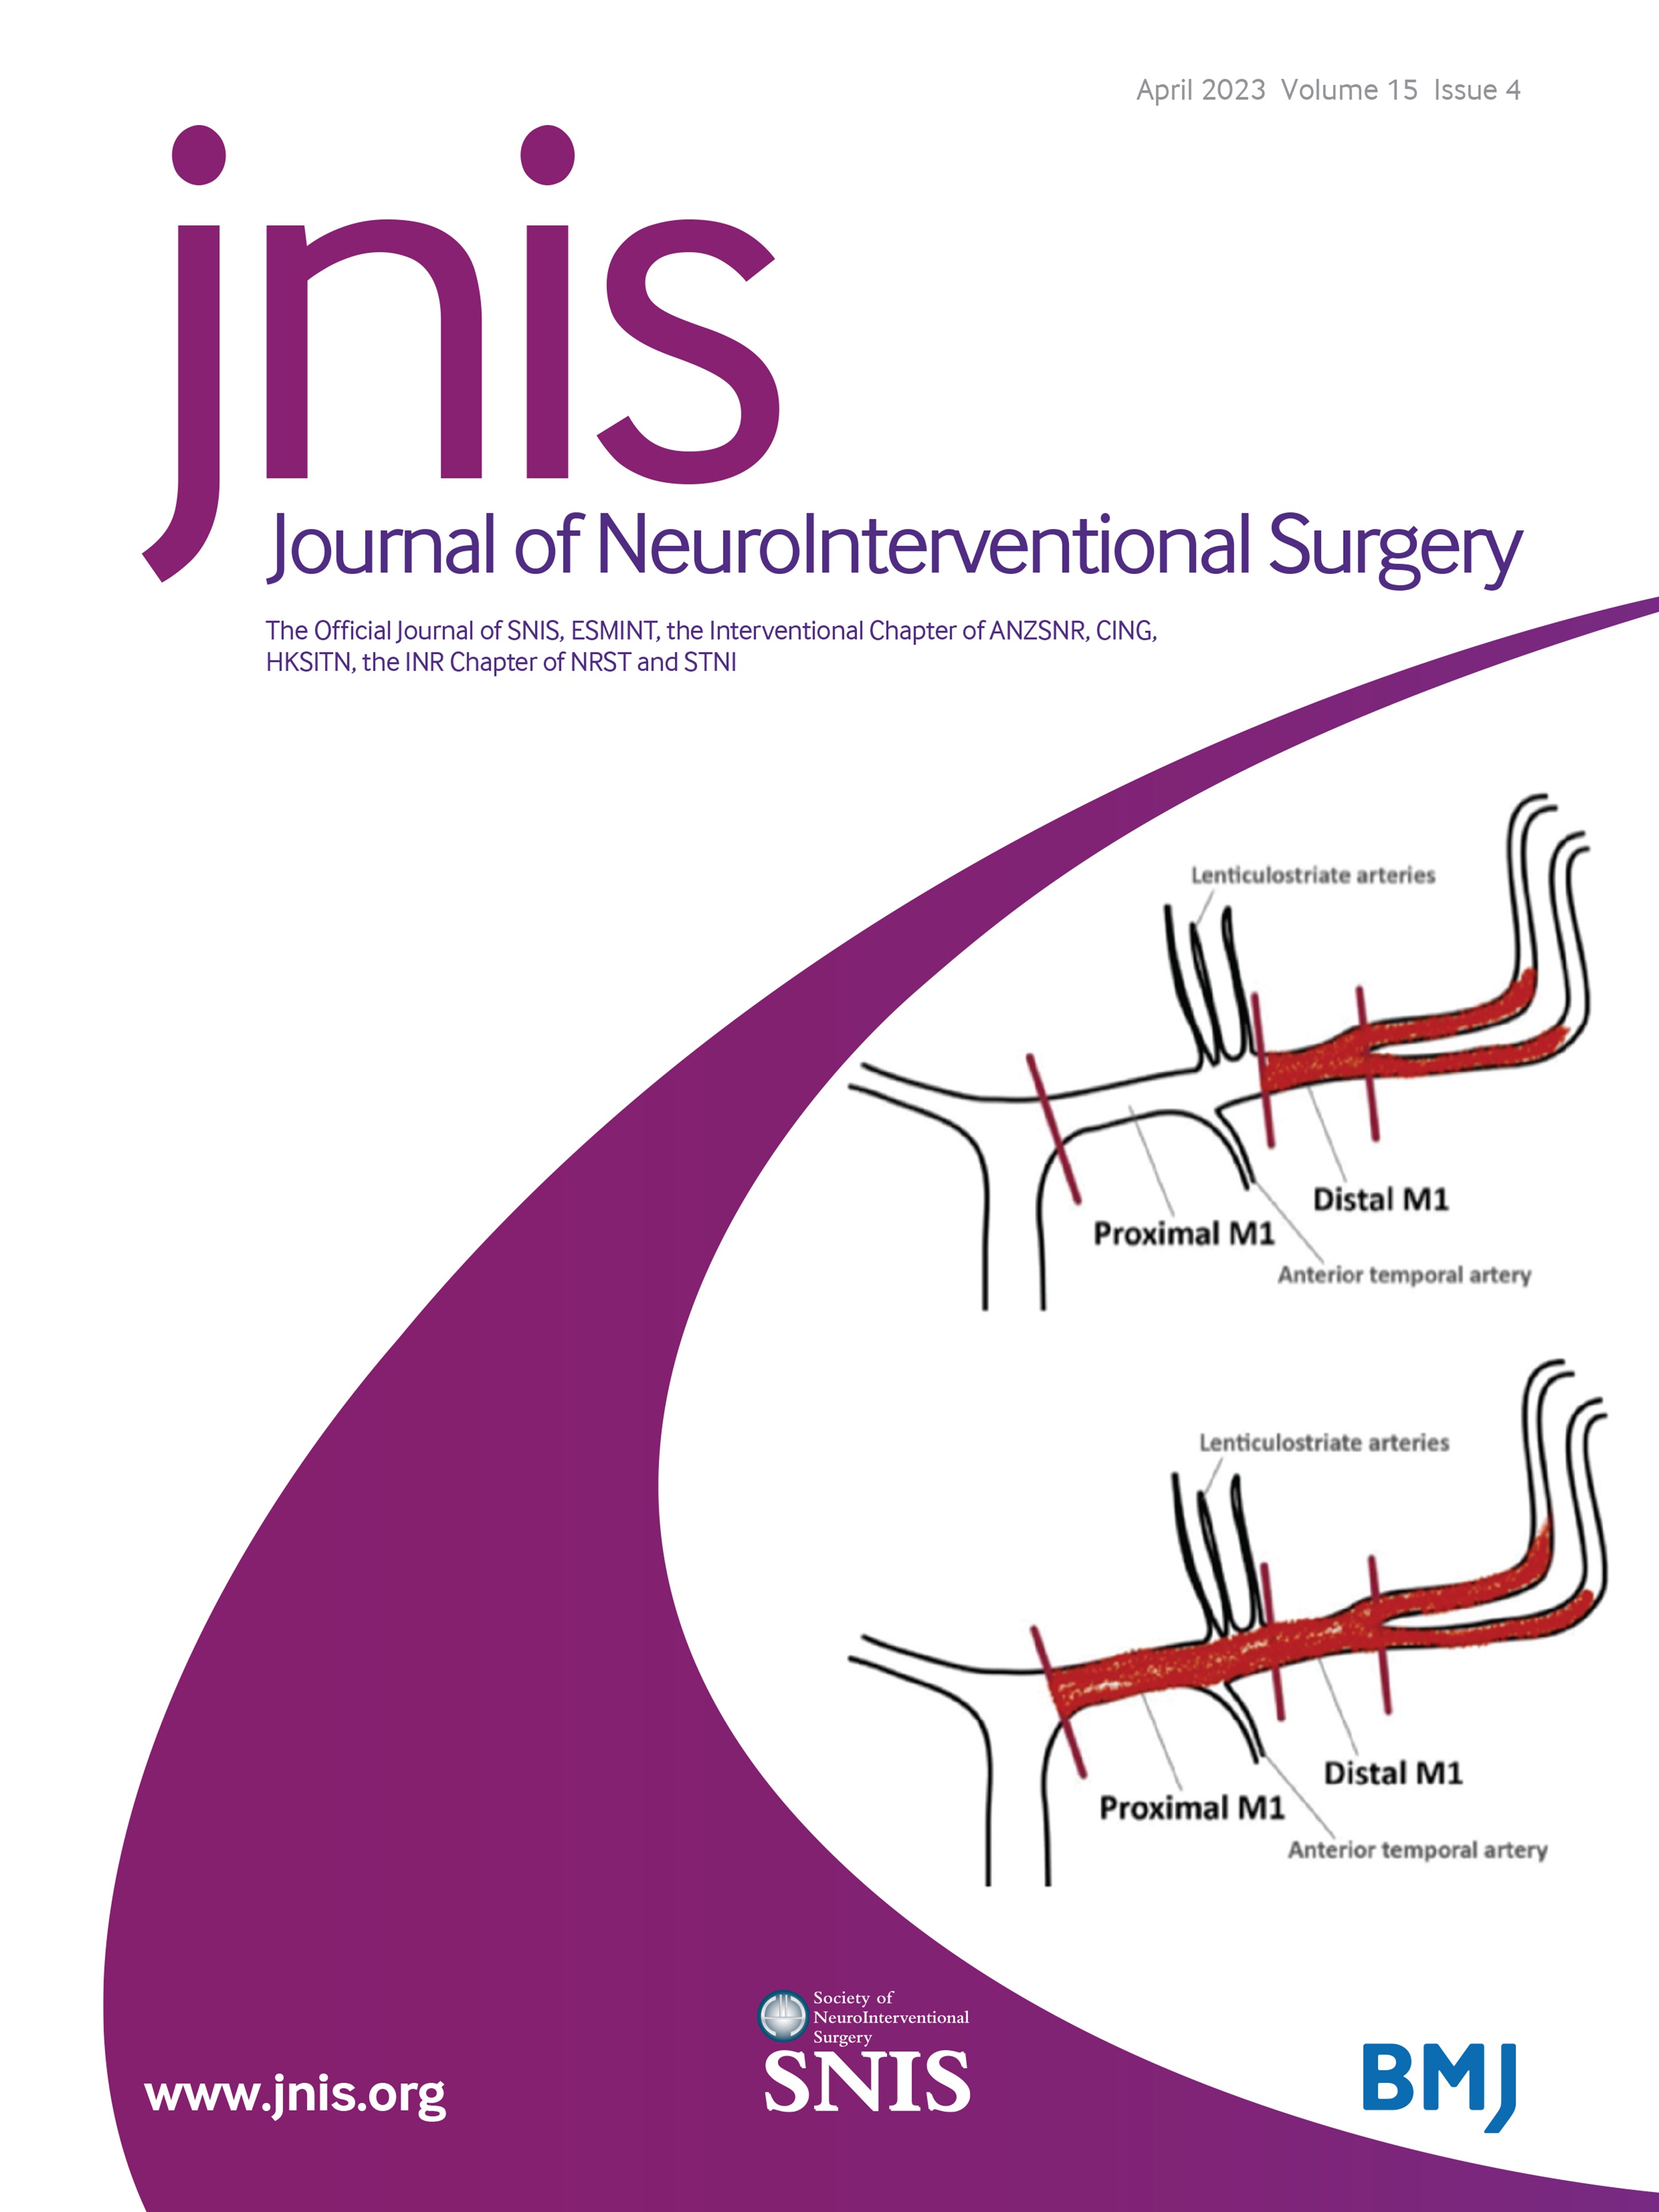 Standard umbilical artery catheters used as diagnostic and neurointerventional guide catheters in the treatment of neonatal cerebrovascular malformations